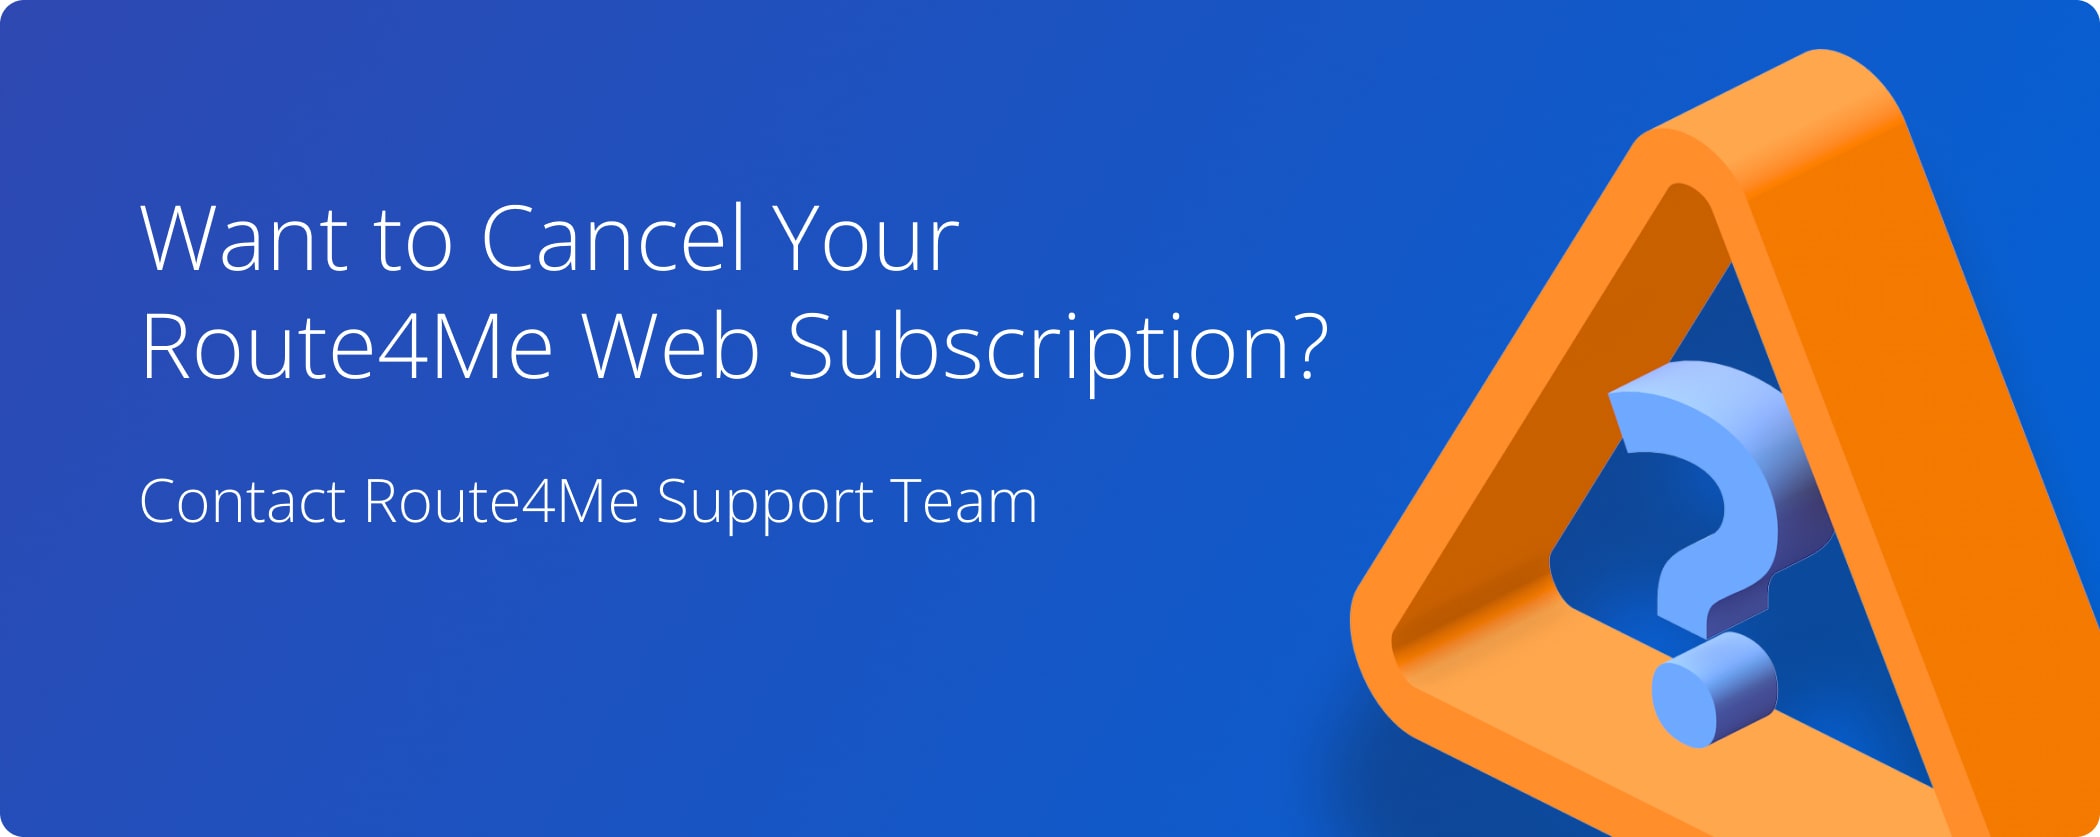 To cancel Route4Me Web Subscription, contact the Route4Me Customer Support Team.